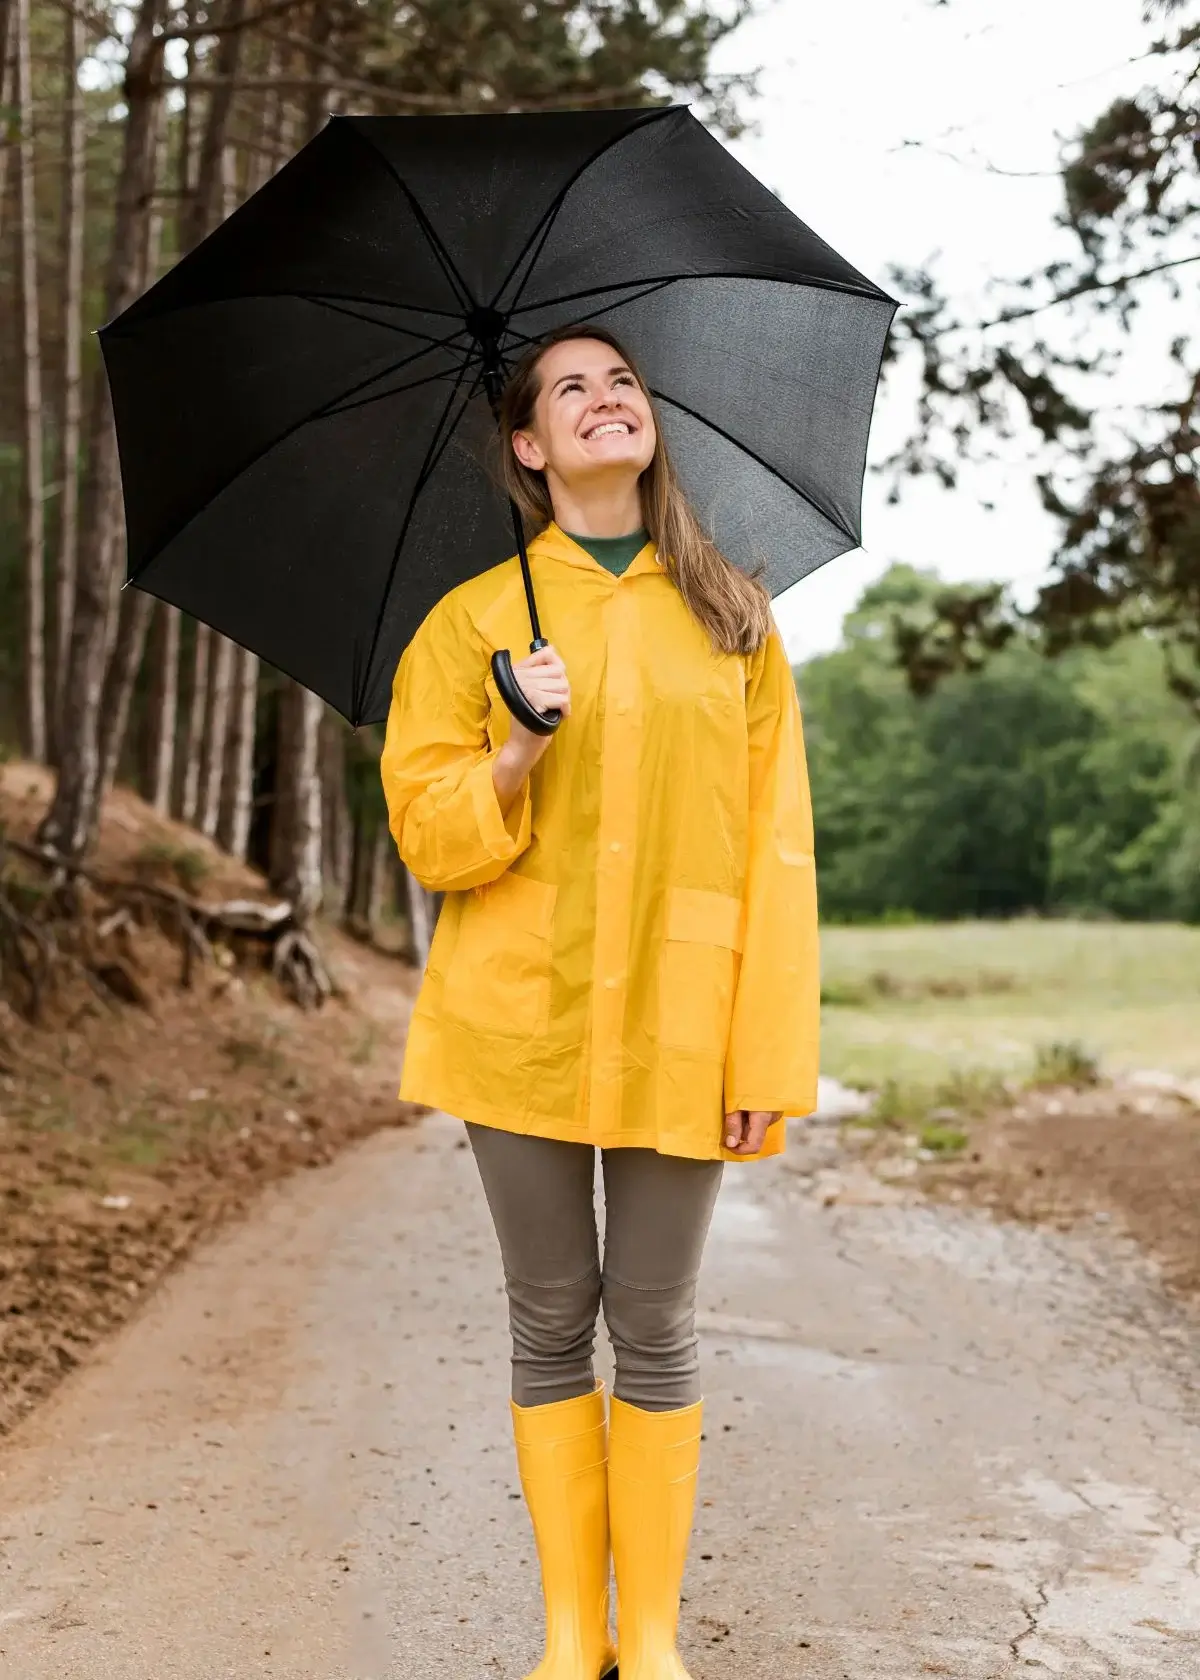 How can I customize my rain poncho for a stylish look?